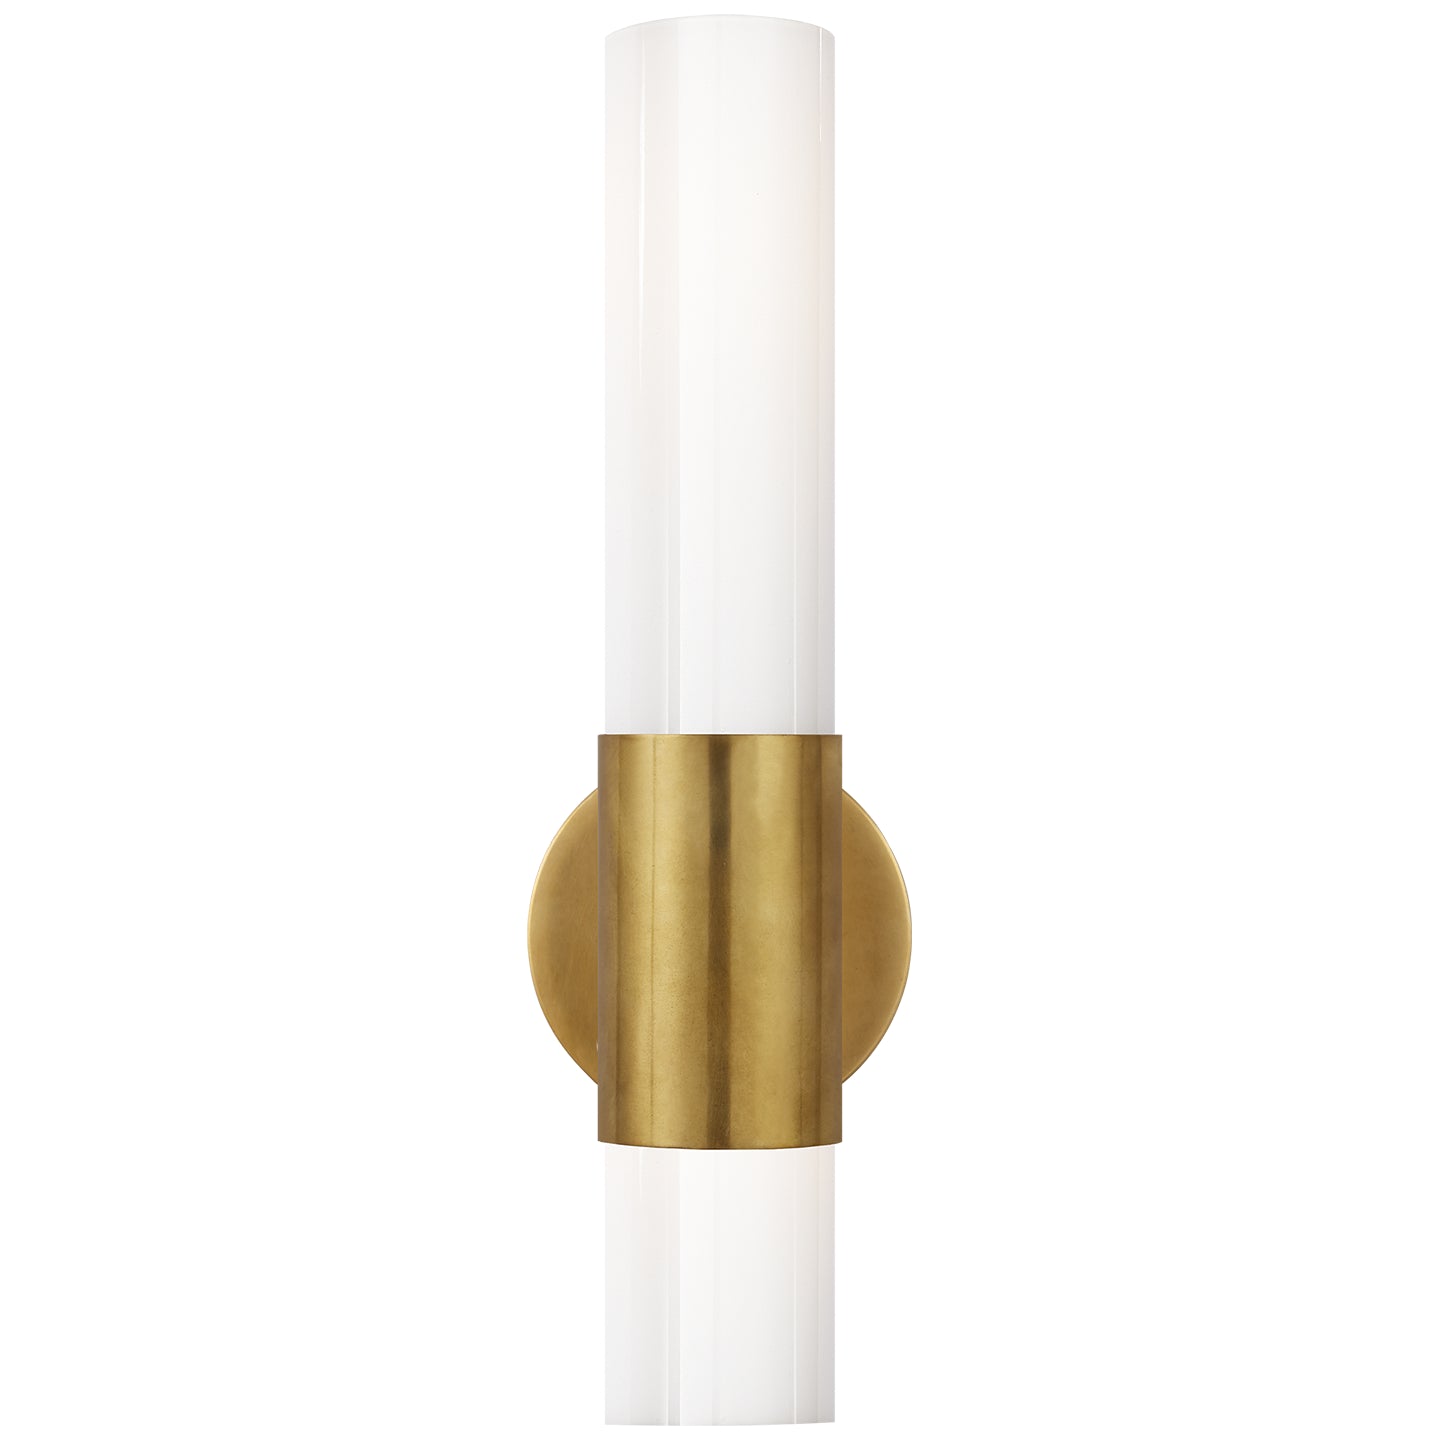 Load image into Gallery viewer, Visual Comfort Signature - ARN 2611HAB-WG - Two Light Wall Sconce - Penz - Hand-Rubbed Antique Brass
